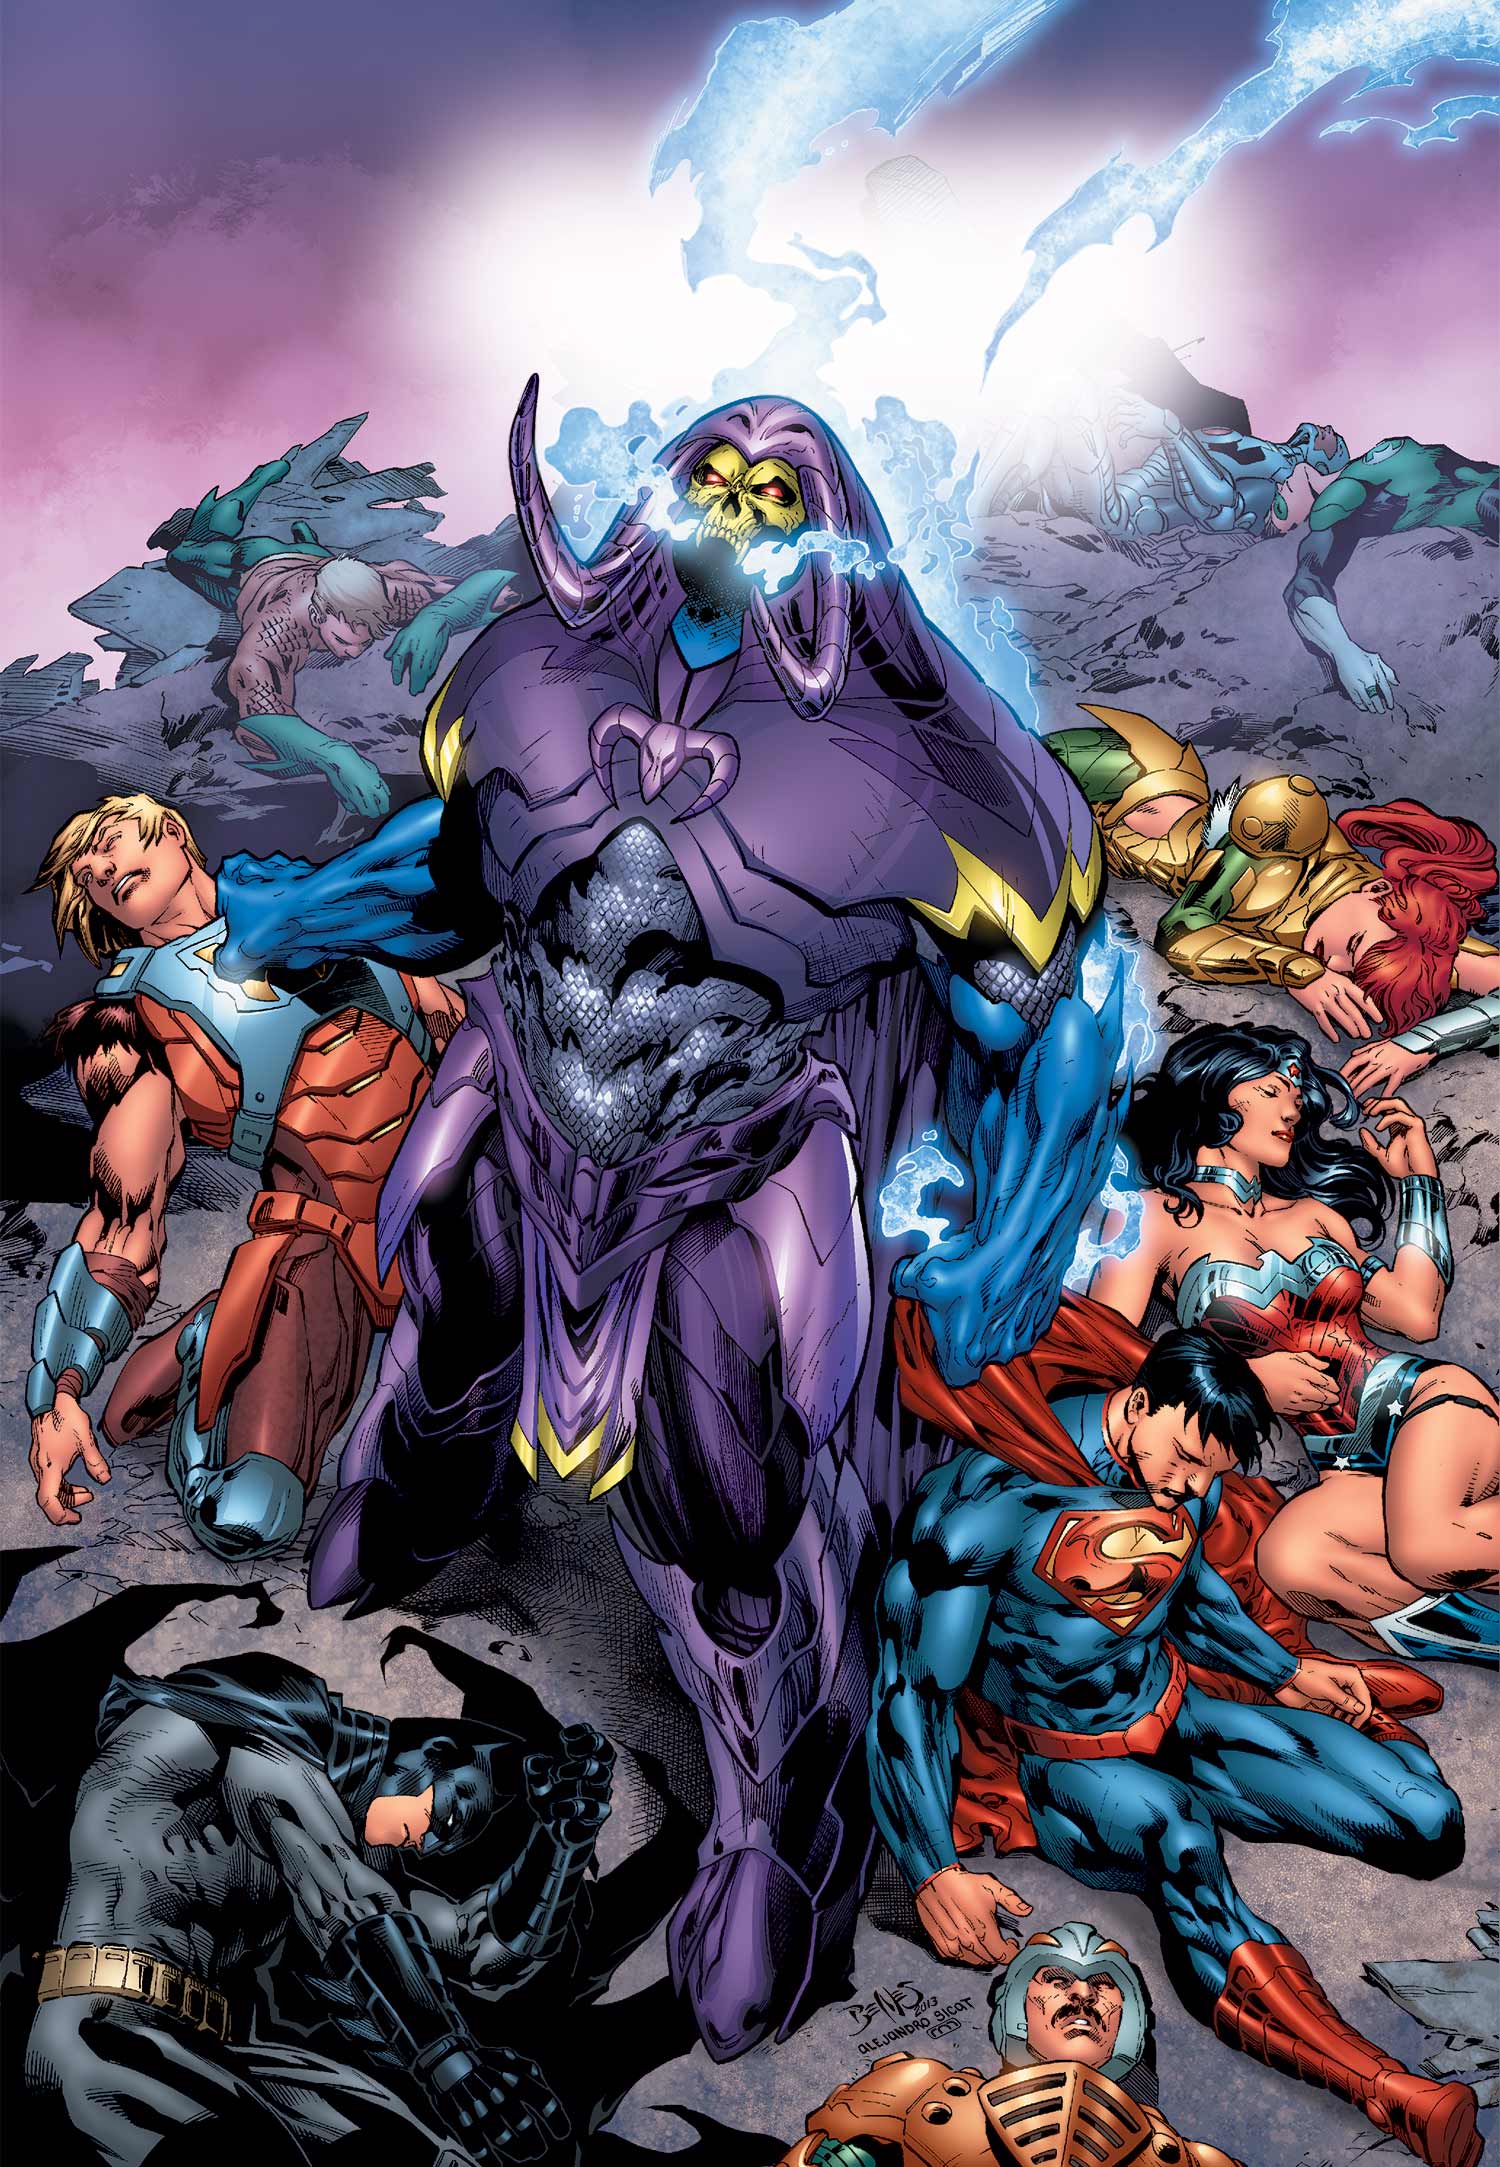 DC Universe vs. The Masters of the Universe #2